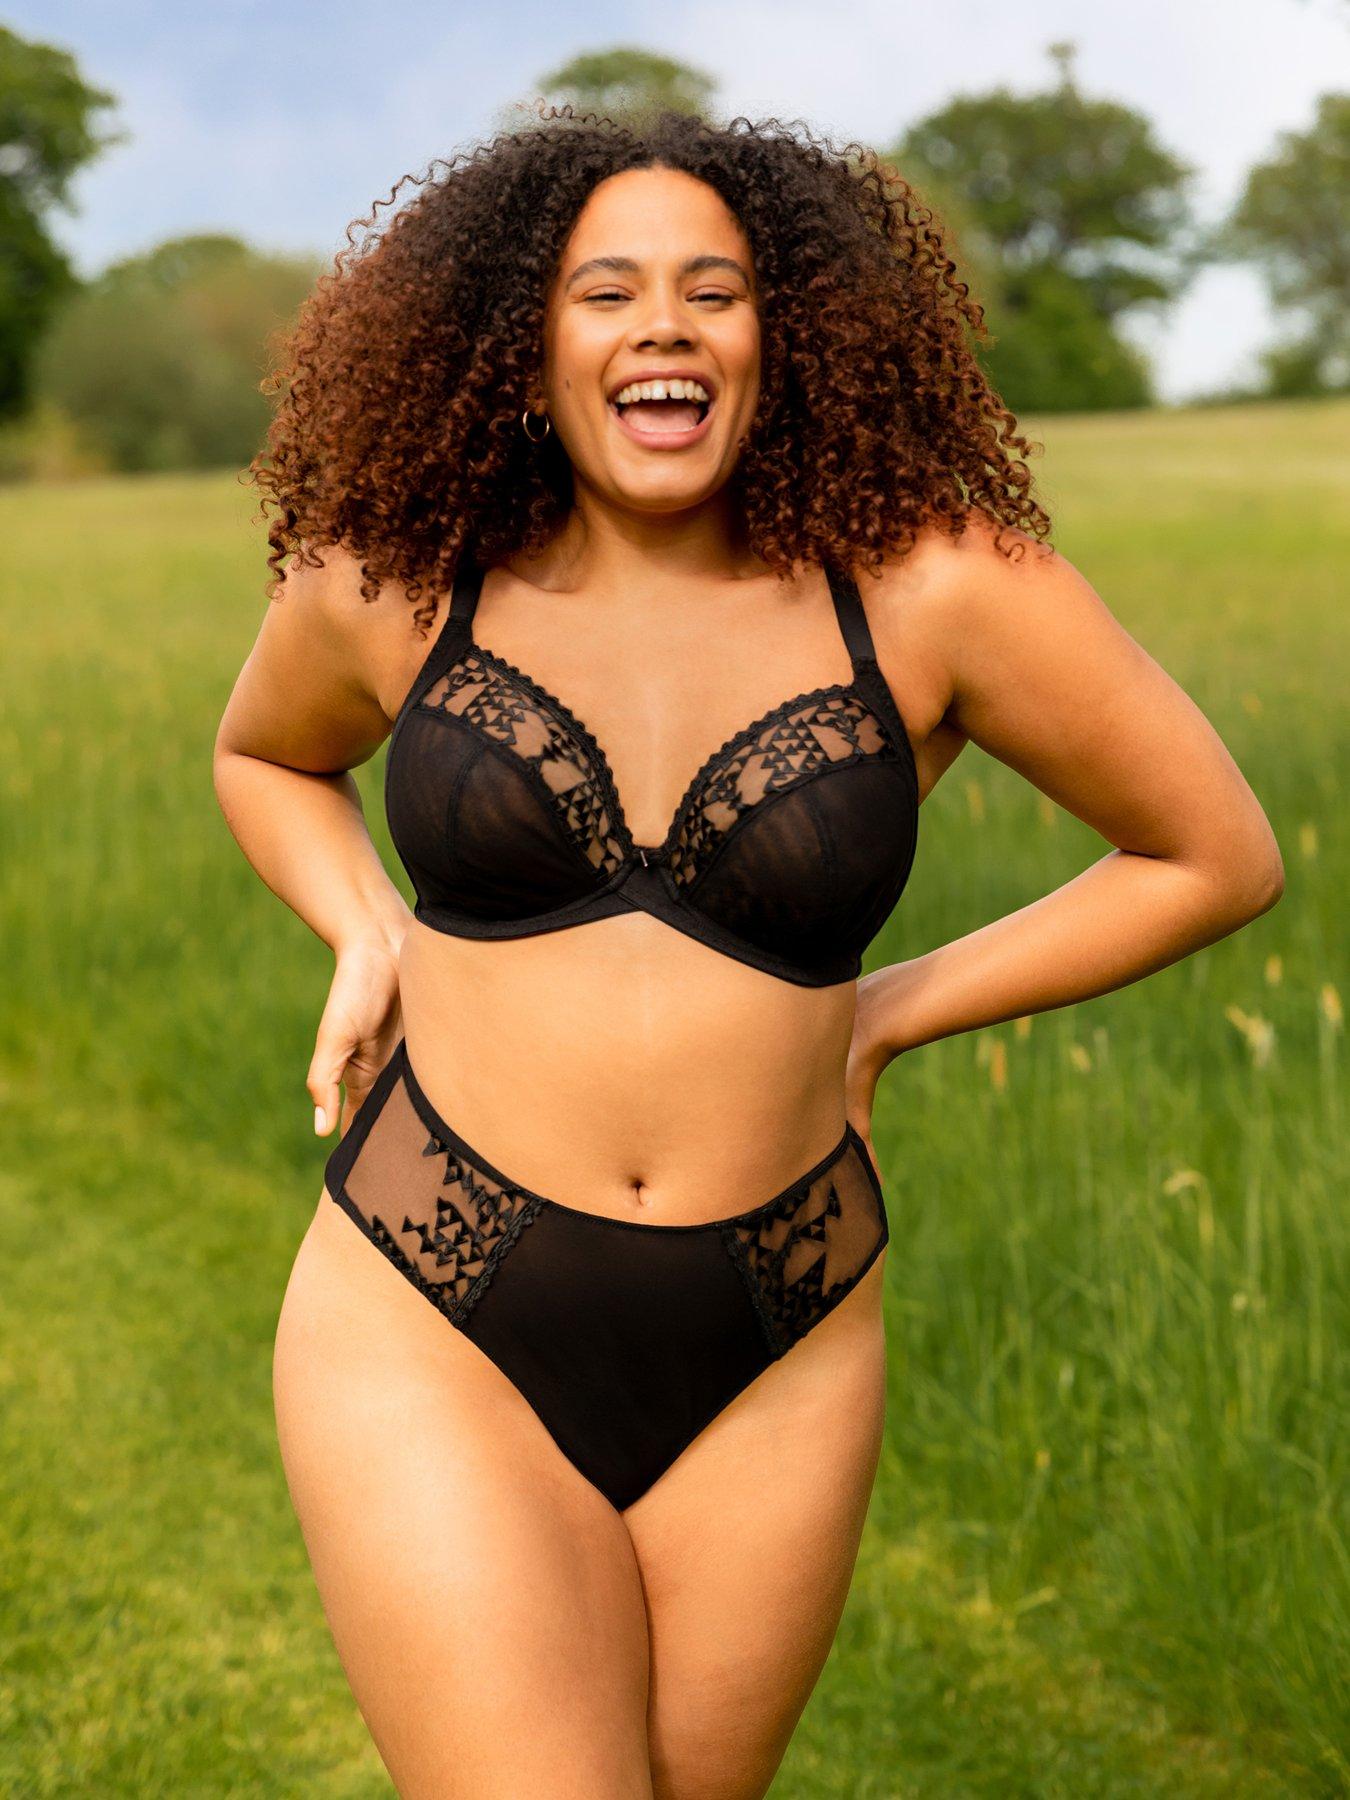 The Bridal lingerie you were looking for from Curvy Kate – Curvy Kate CA